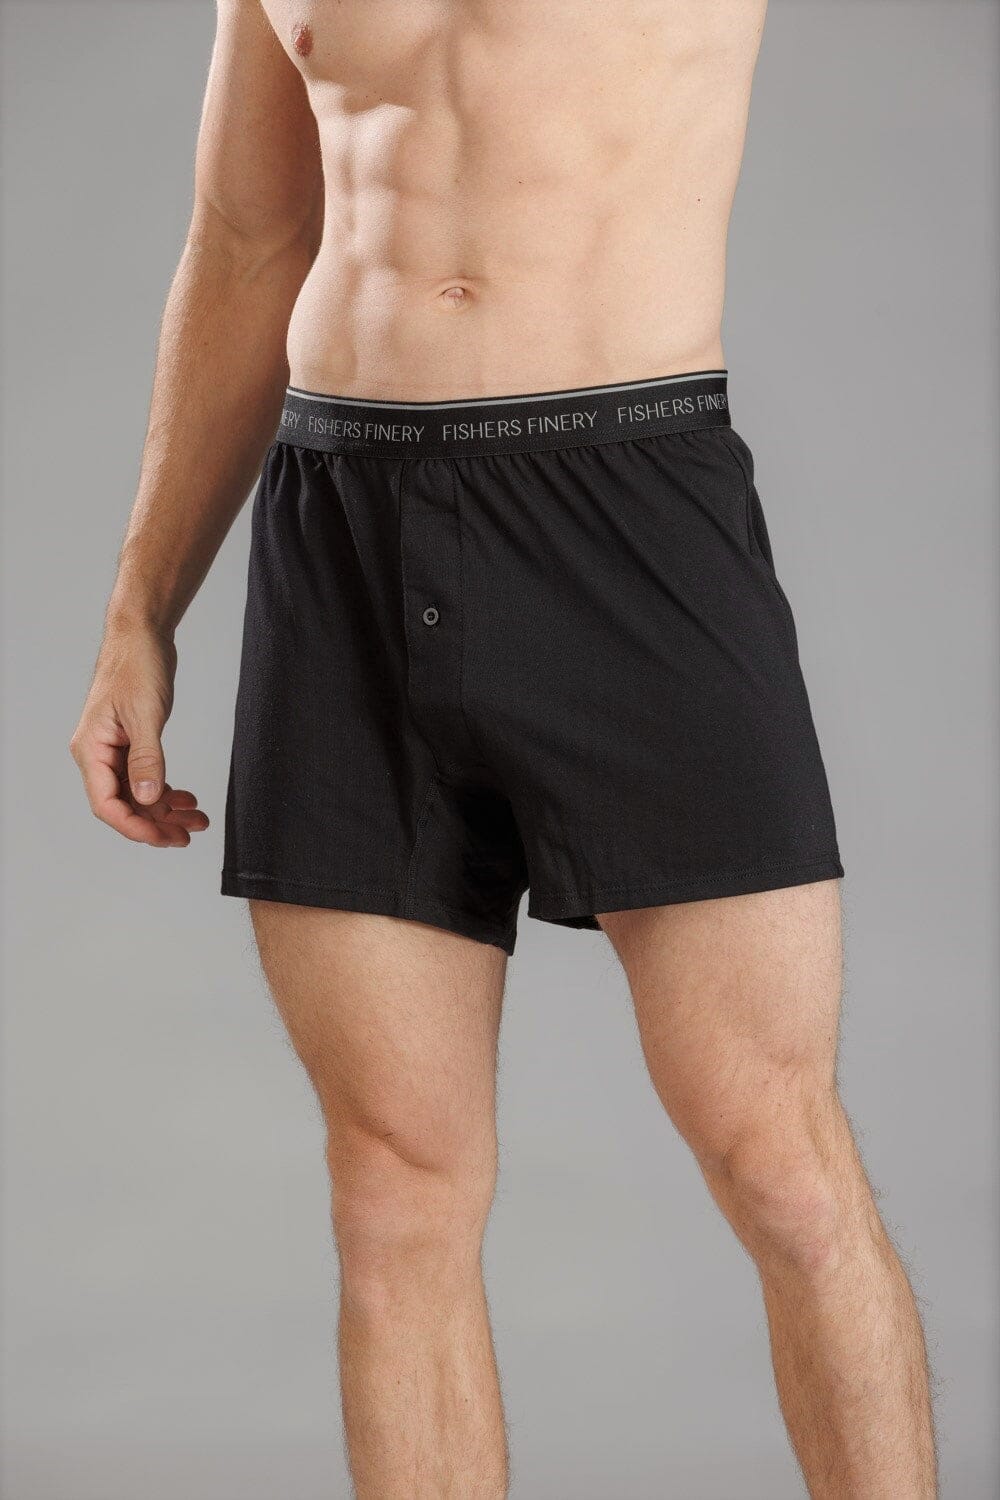 Mens Ultra Soft Modal Boxers: Skin Friendly, Low Rise Organic Cotton Boxer  Briefs With Elasticity, Breathable, And Solid Comfort From Freeurmindad,  $9.57